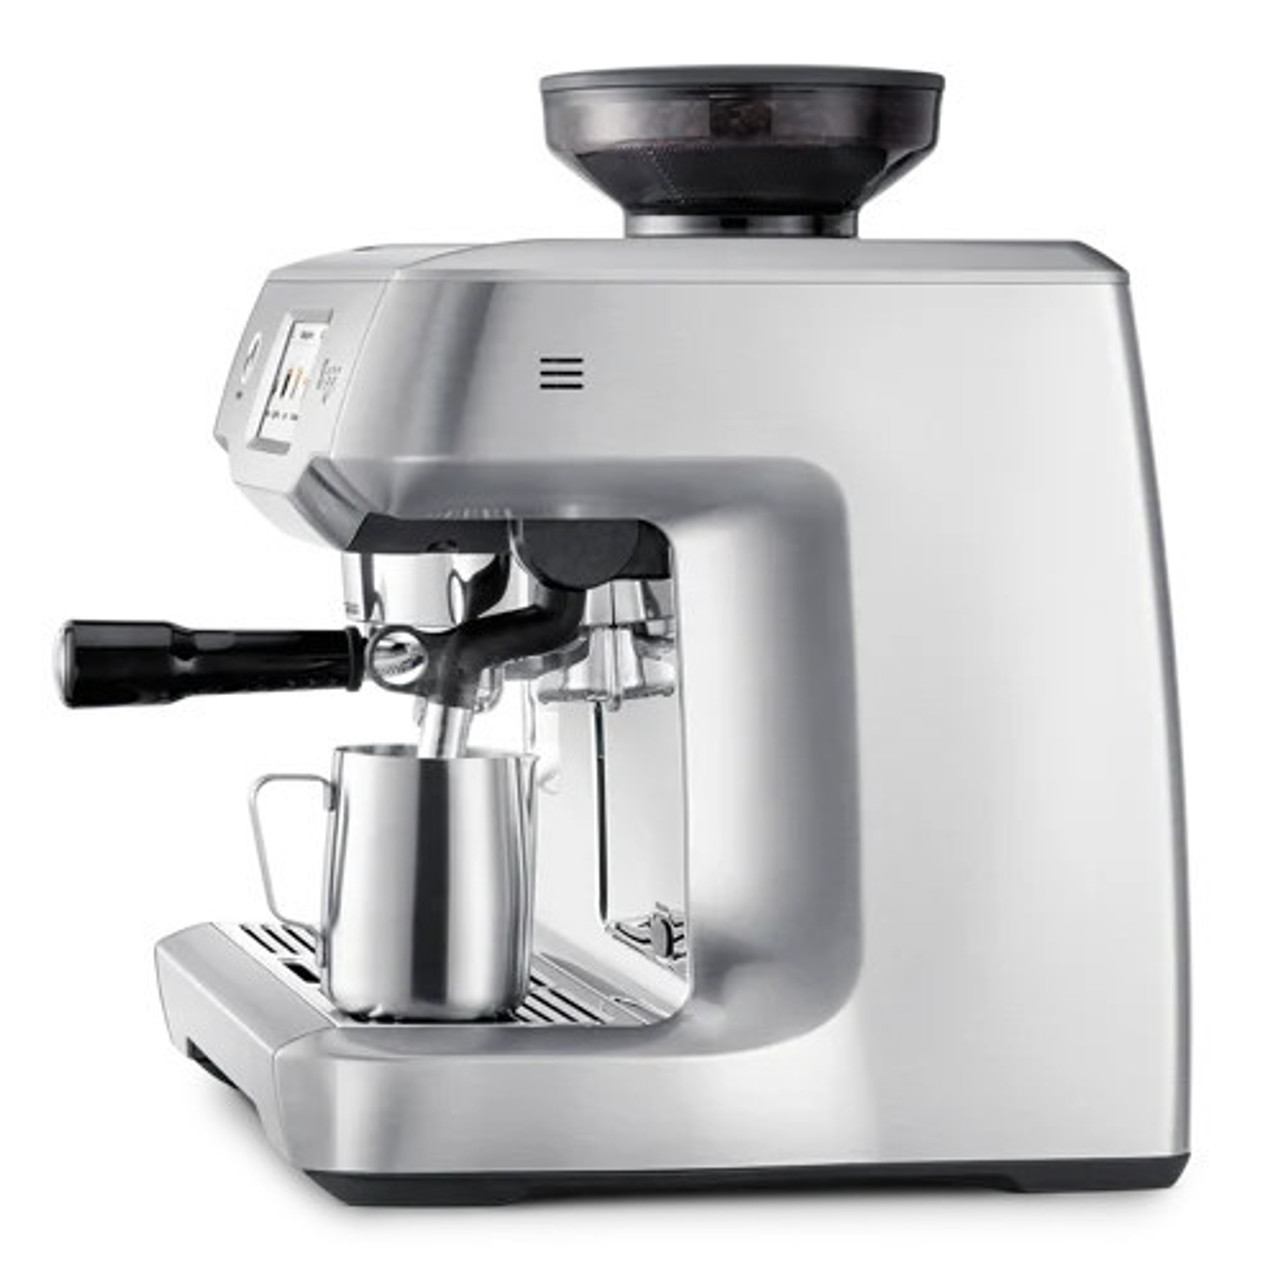 SAGE SES990BSS - THE ORACLE™ TOUCH espresso coffee machine - silver